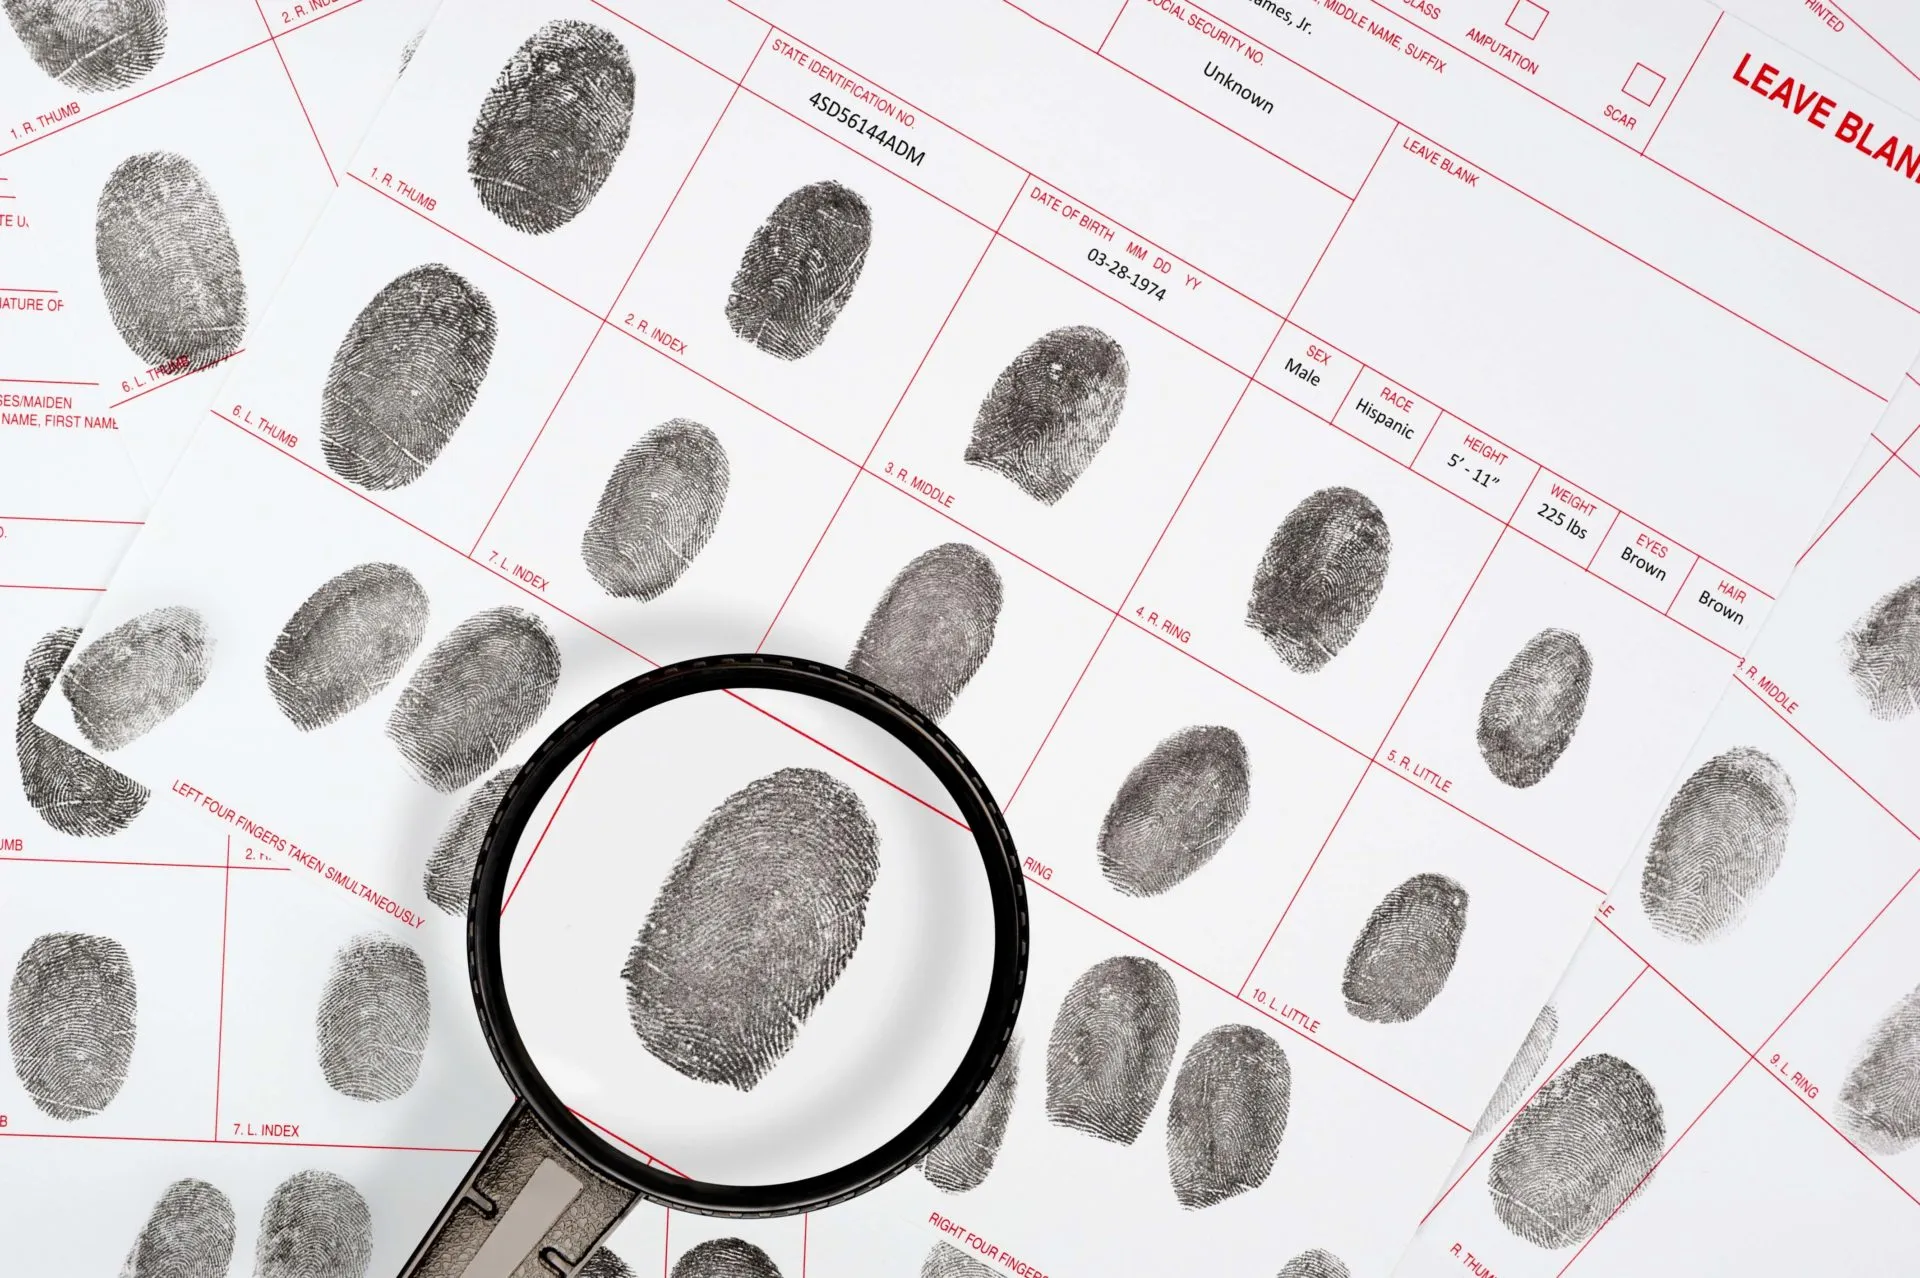 A forensic inspector looks at a suspect fingerprint on legal detective files.